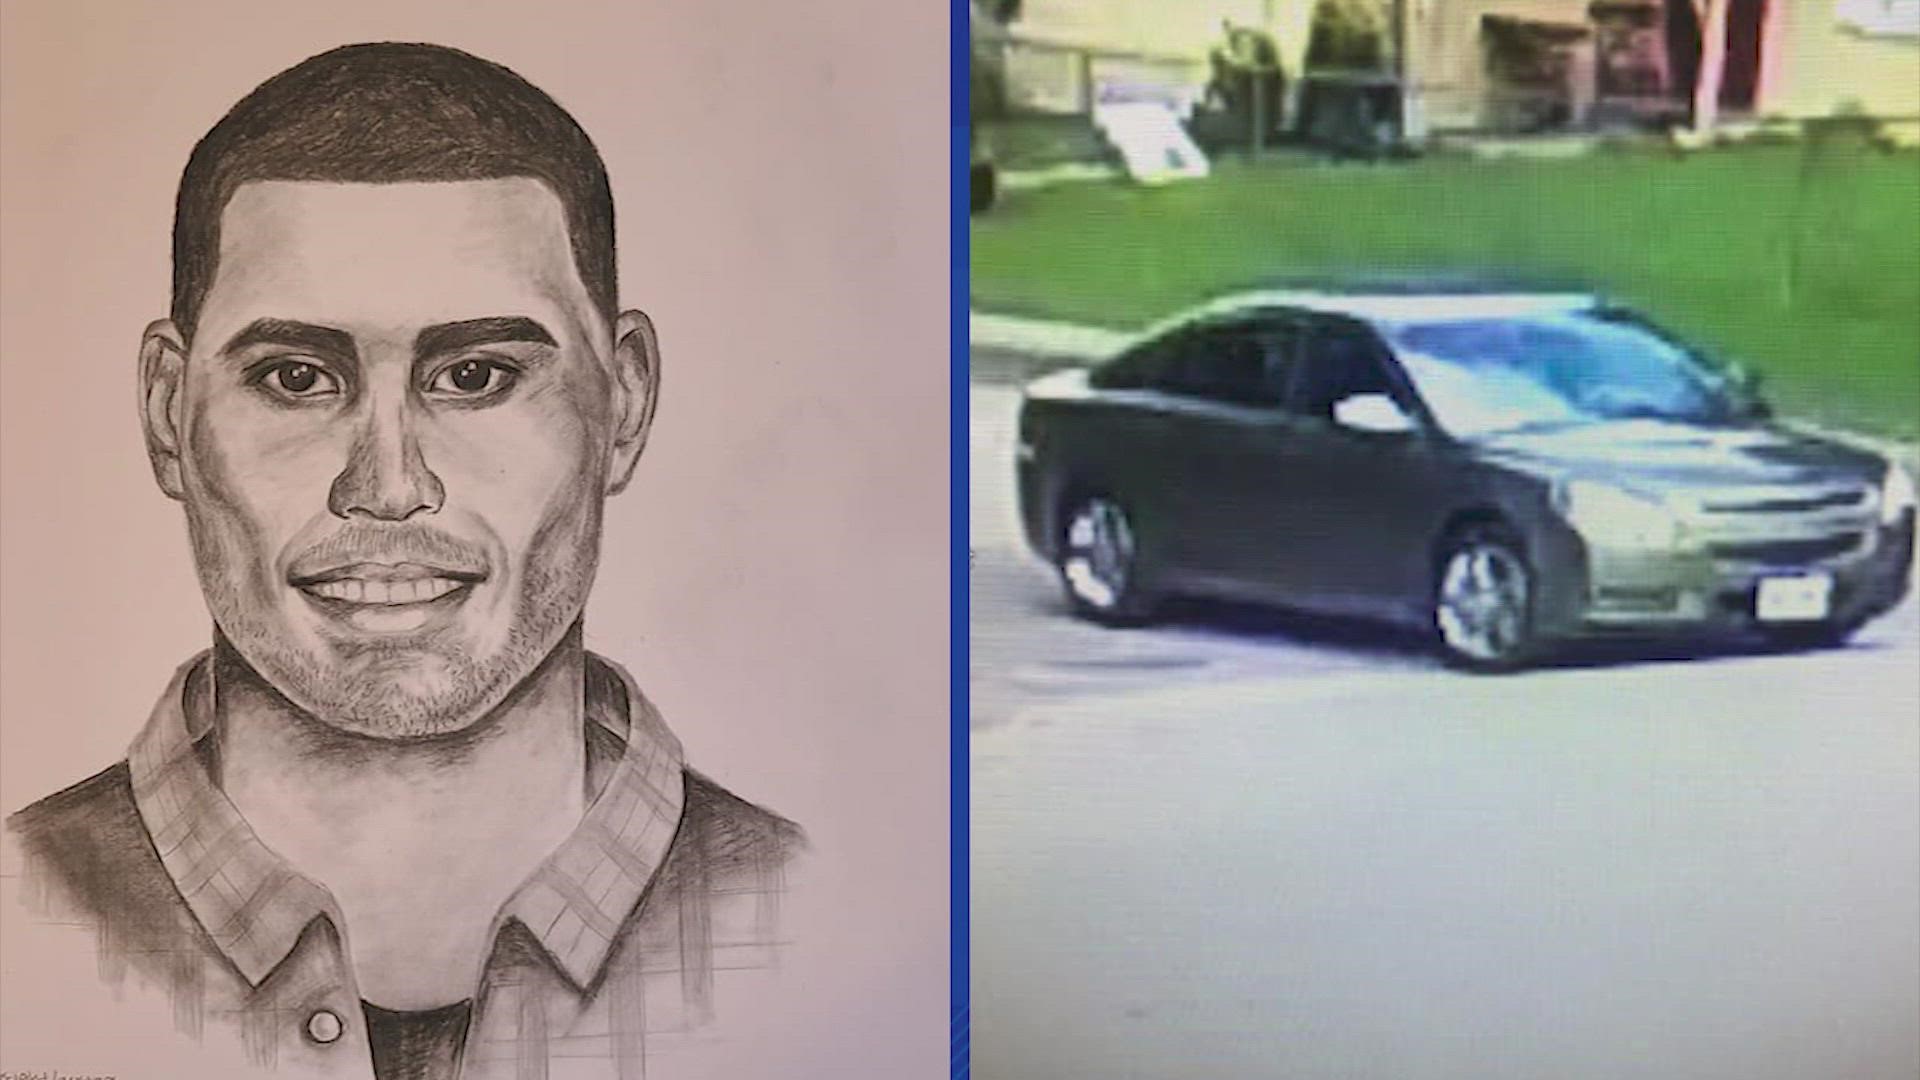 The Brazoria County Sheriff's Office released a sketch Thursday of a man they say posed as a truancy officer to kidnap a high school student.